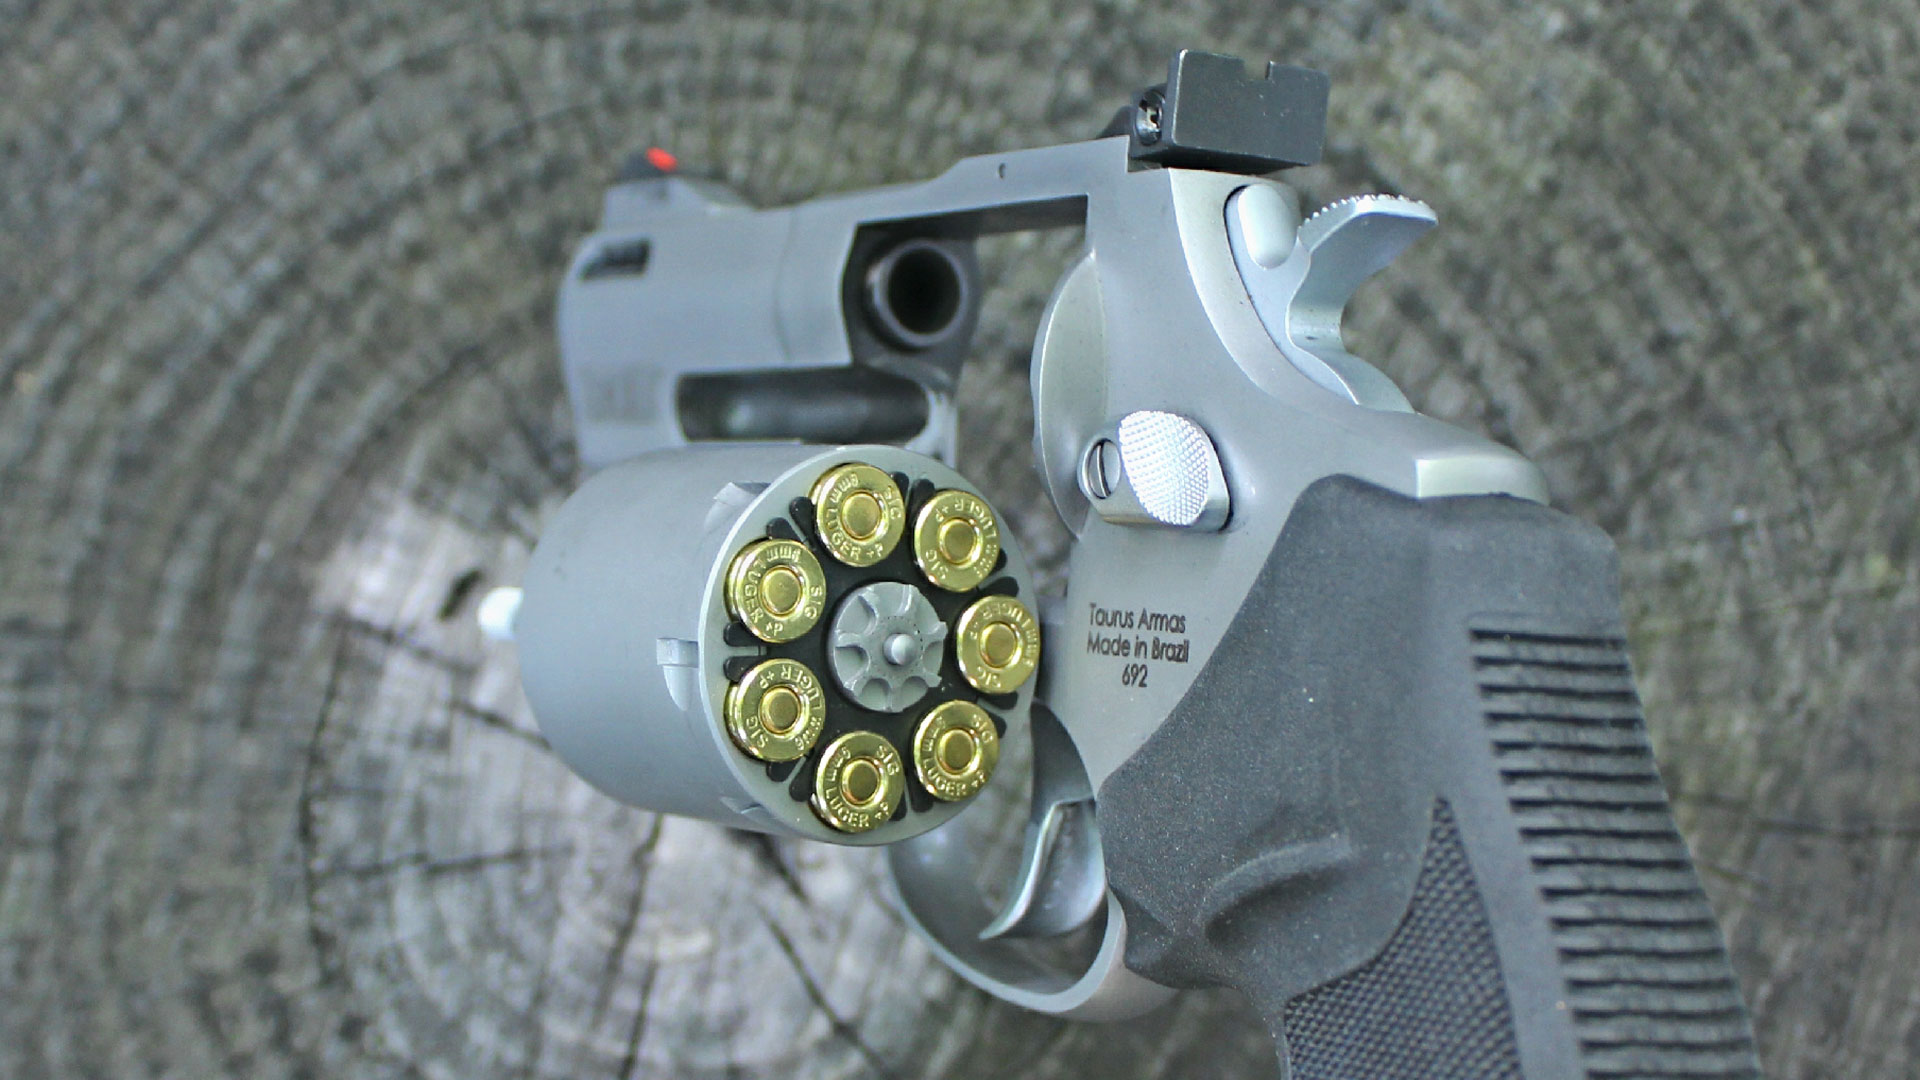 Taurus 692 loaded with 9mm